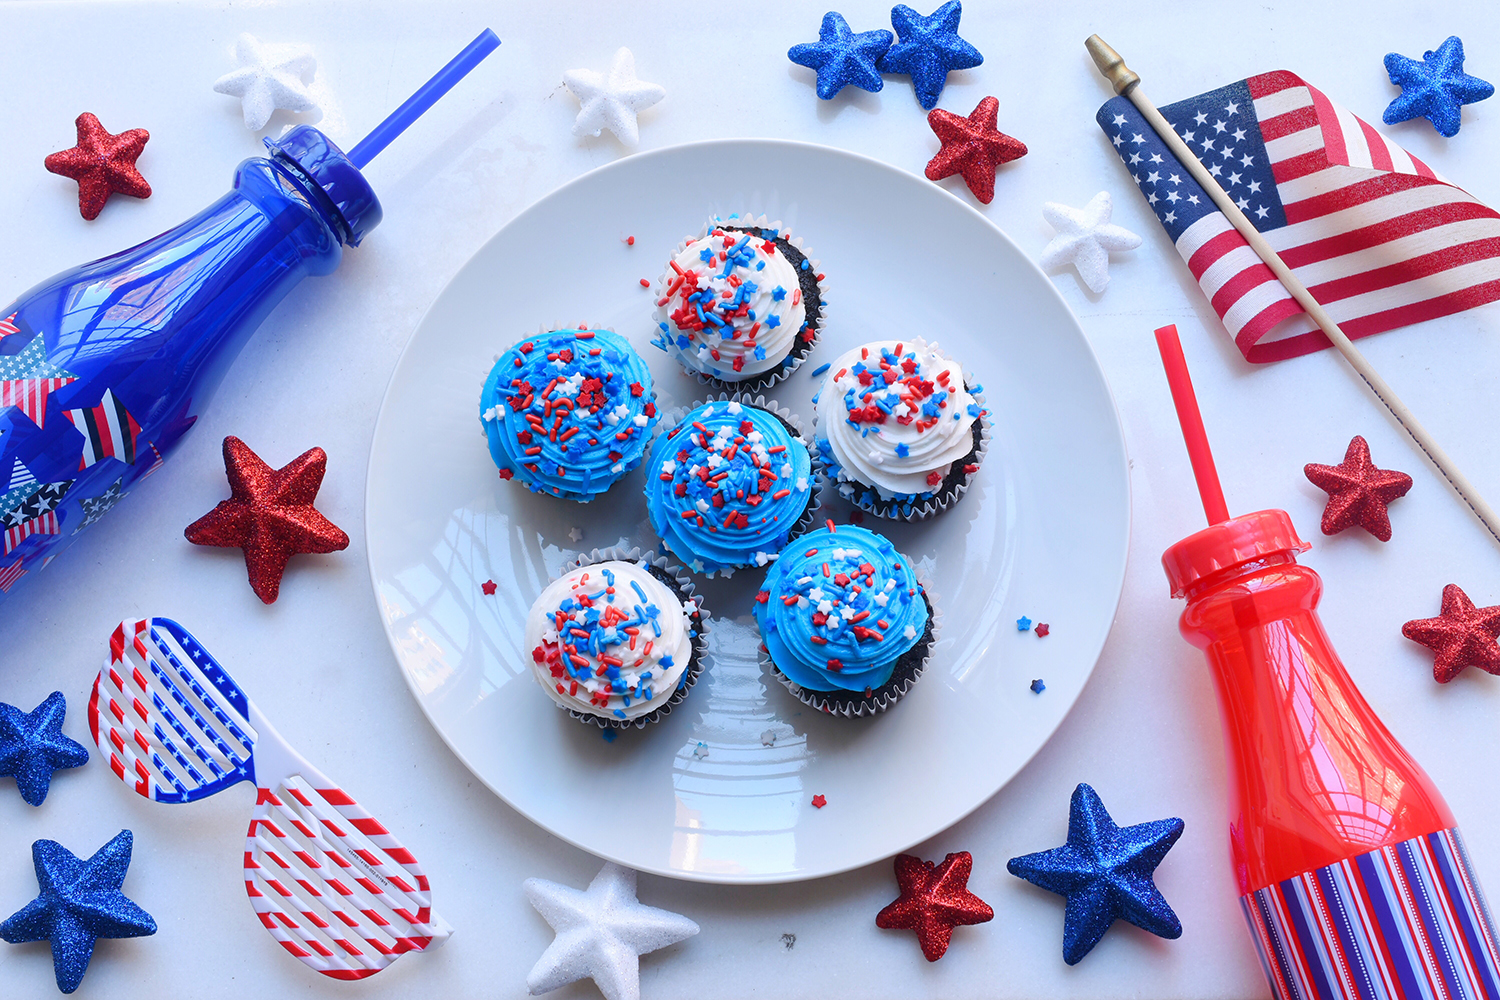 Fun and Safe 4th of July Activities That Don't Involve Fireworks